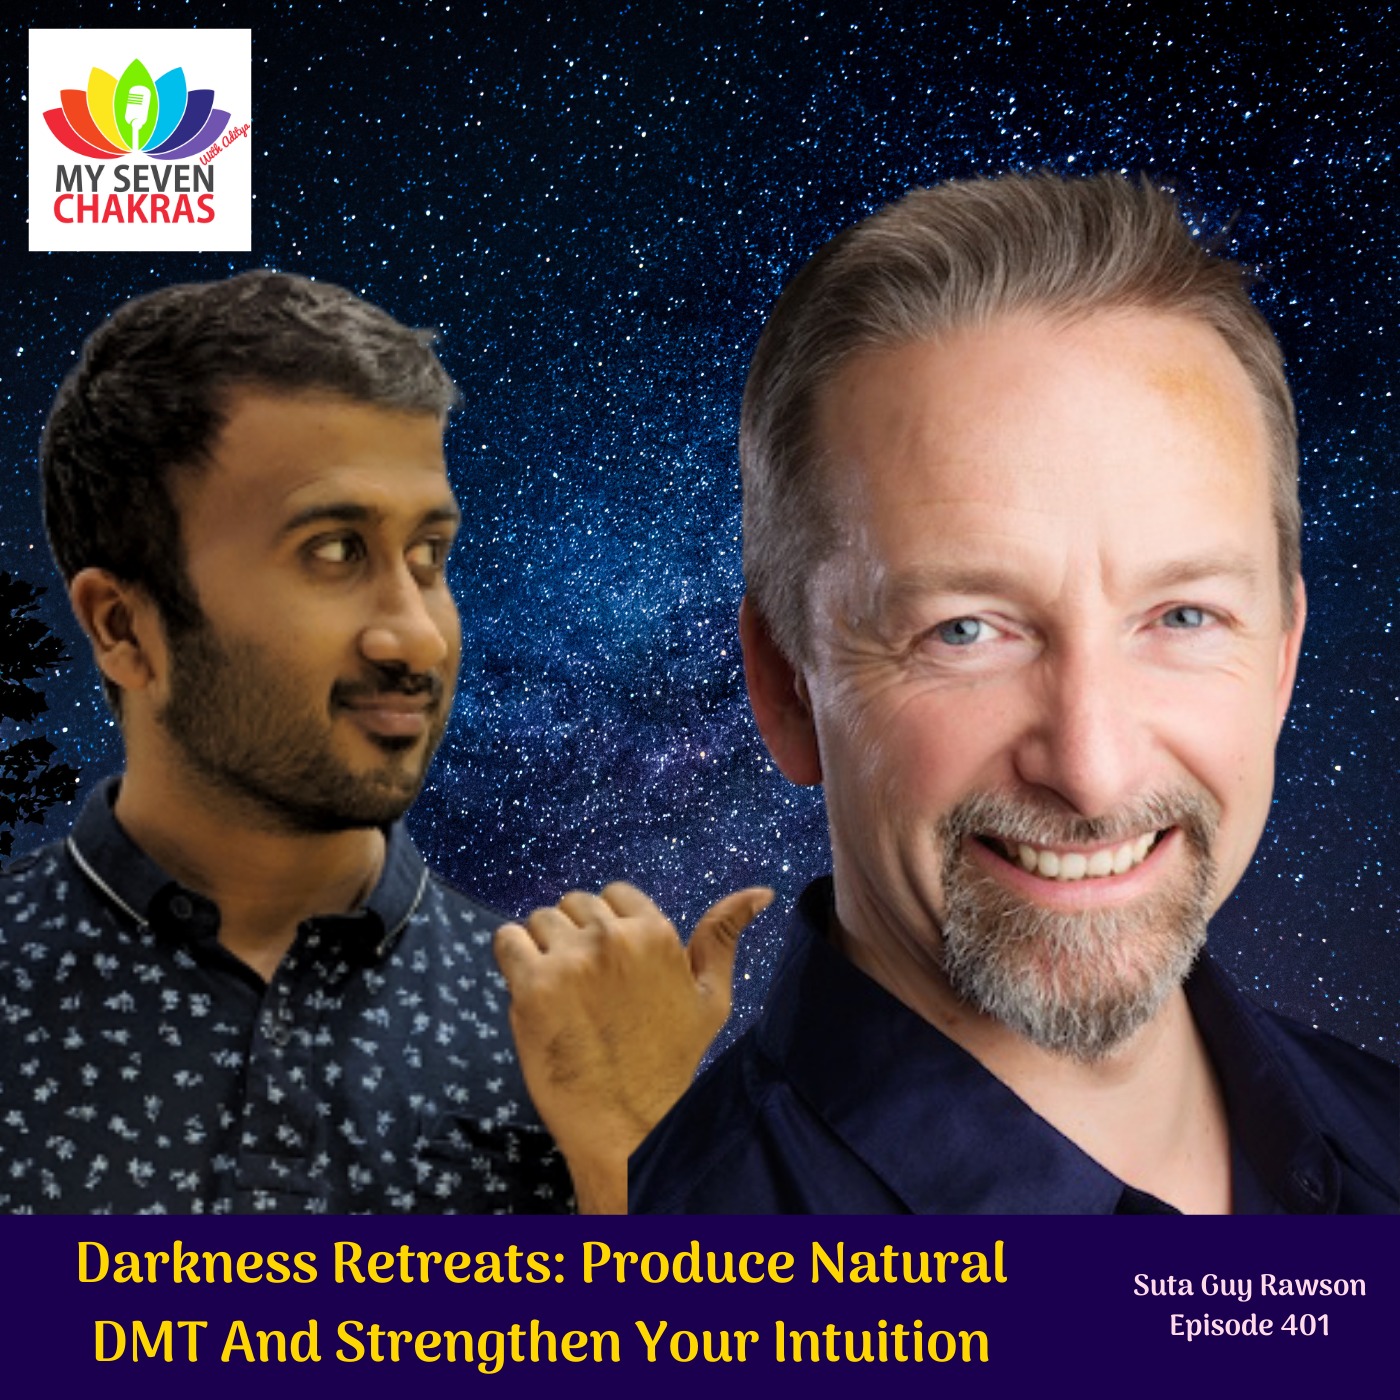 Darkness Retreats: Produce Natural DMT And Strengthen Your Intuition with Suta Guy Rawson